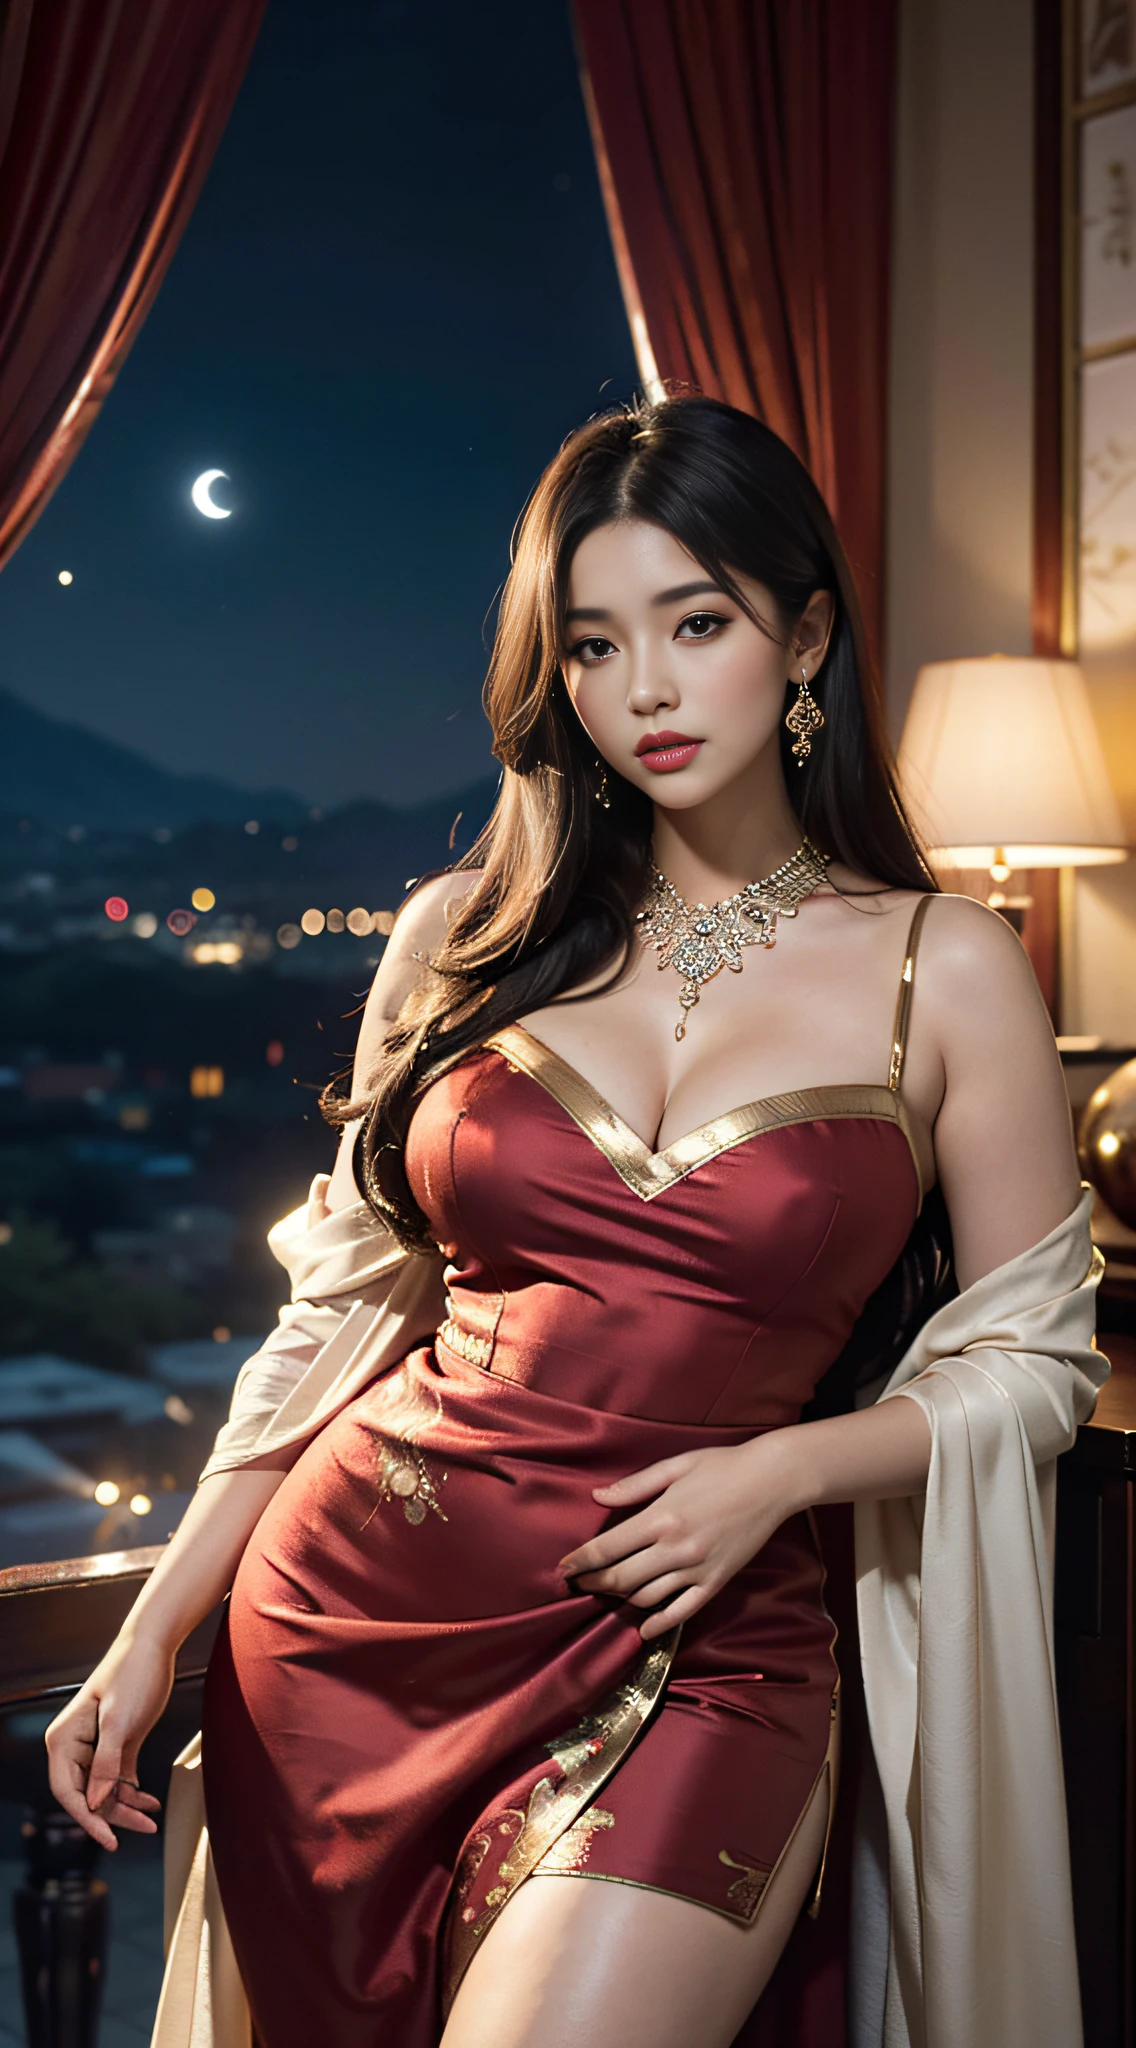 The art depicts a charming woman dressed in a flowing, silky traditional oriental dress decorated with intricate patterns and bright colors. Her dress drapes elegantly over her curvy figure, accentuating her seductive silhouette. She stood gracefully in the quiet moonlit night, bathed in the soft glow of the moonlight. The scene exudes an ethereal and dreamy atmosphere, with a touch of mystery and sexiness. The graphic style blends watercolor and digital illustration techniques to evoke a refined beauty and charm. The lights are filled with soft moonlight, casting soft highlights and shadows on her charming features. Bare thighs(looking at viewer:1.5)